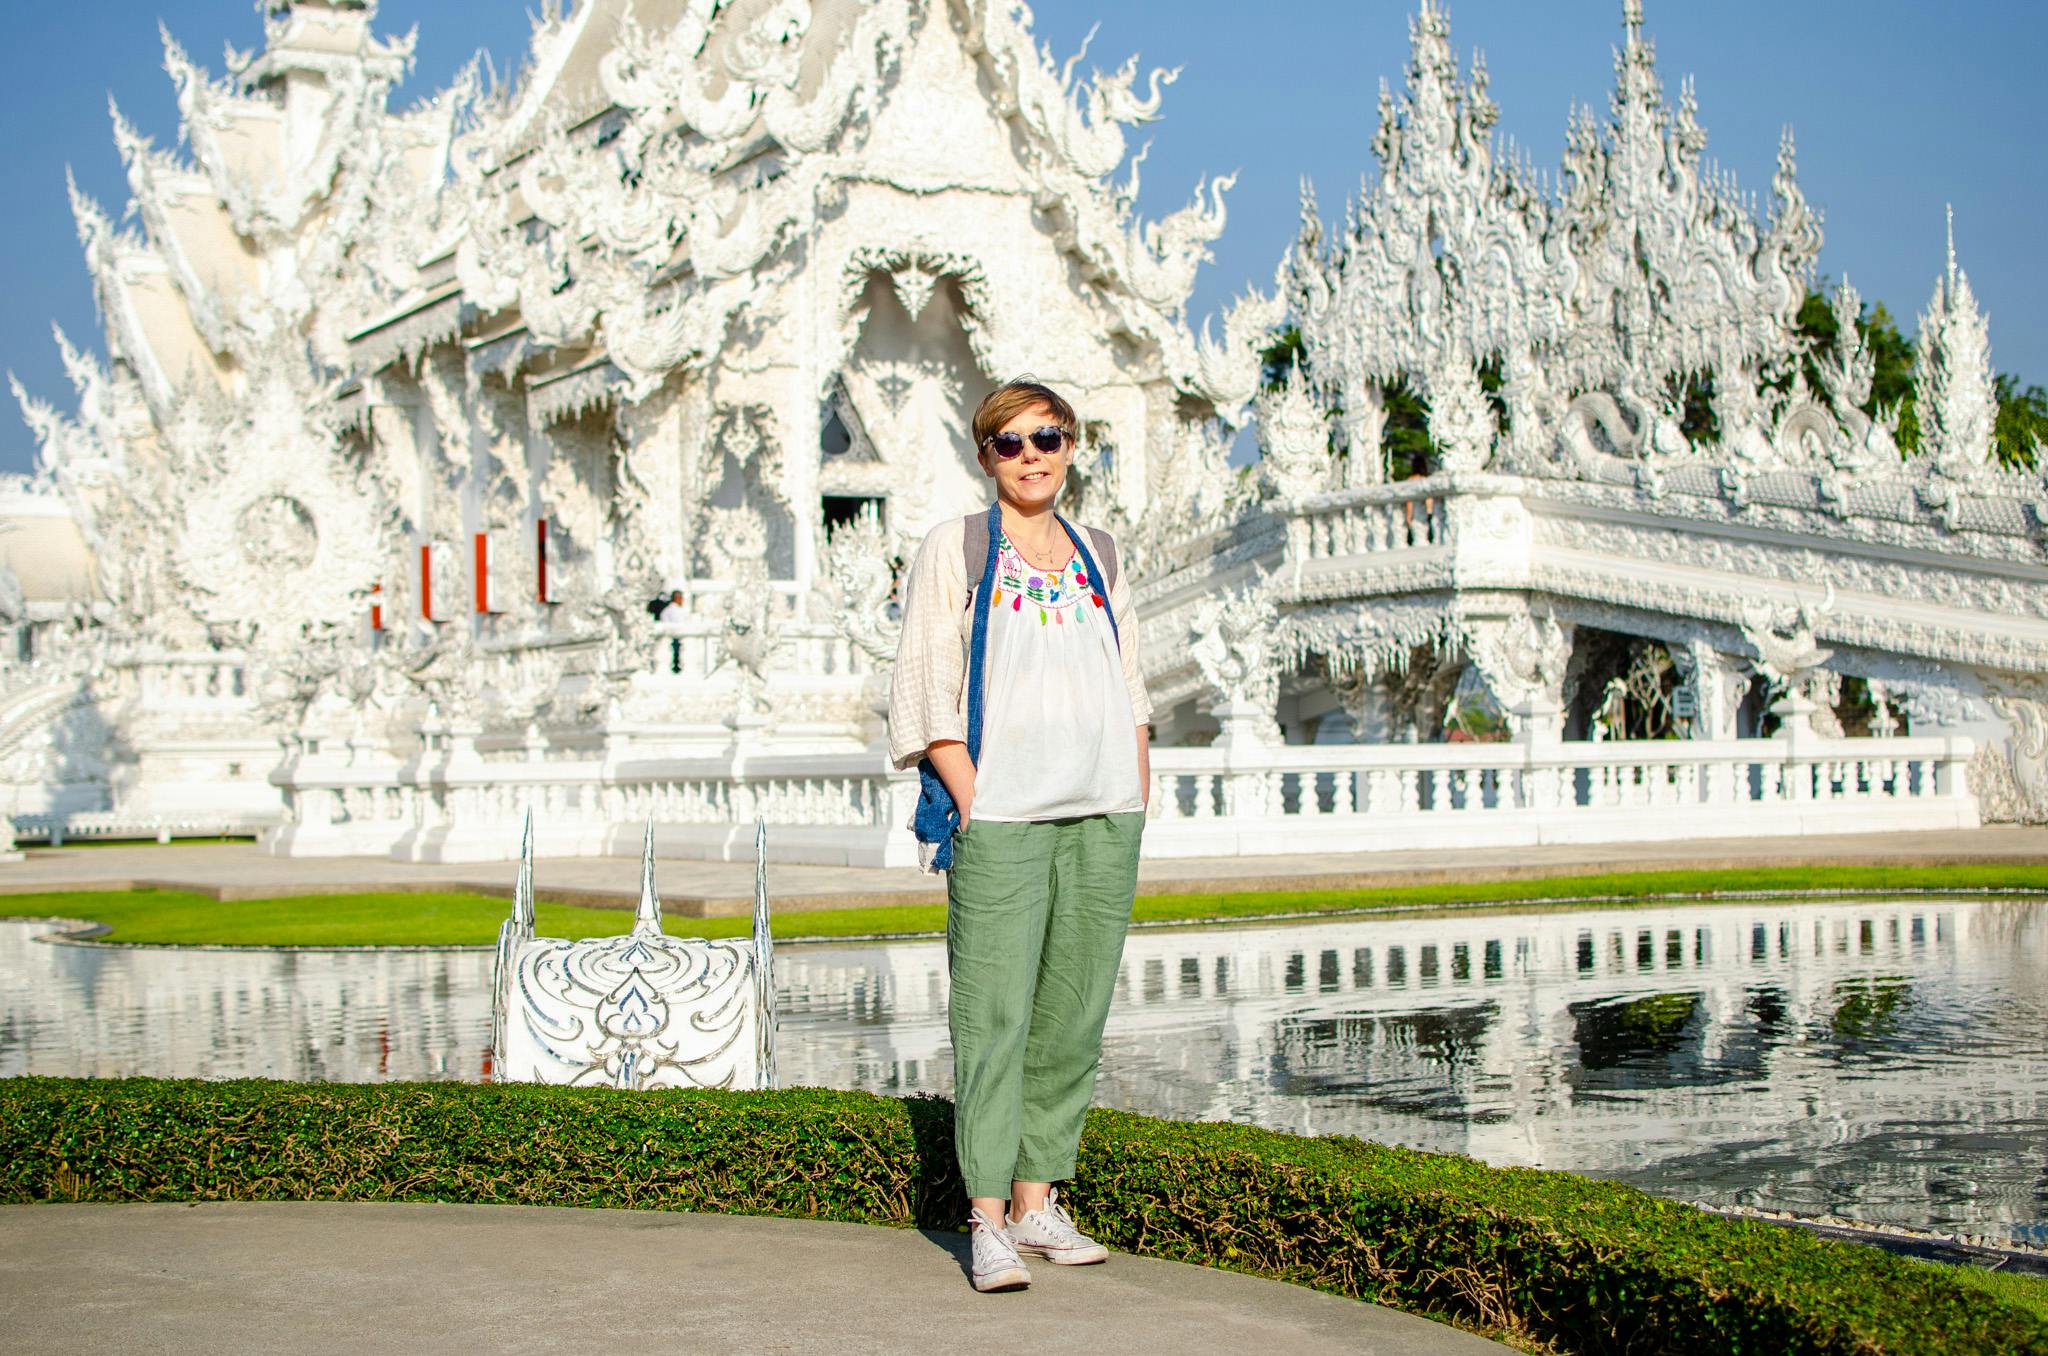 White Temple, Chiang Rai, front of the temple